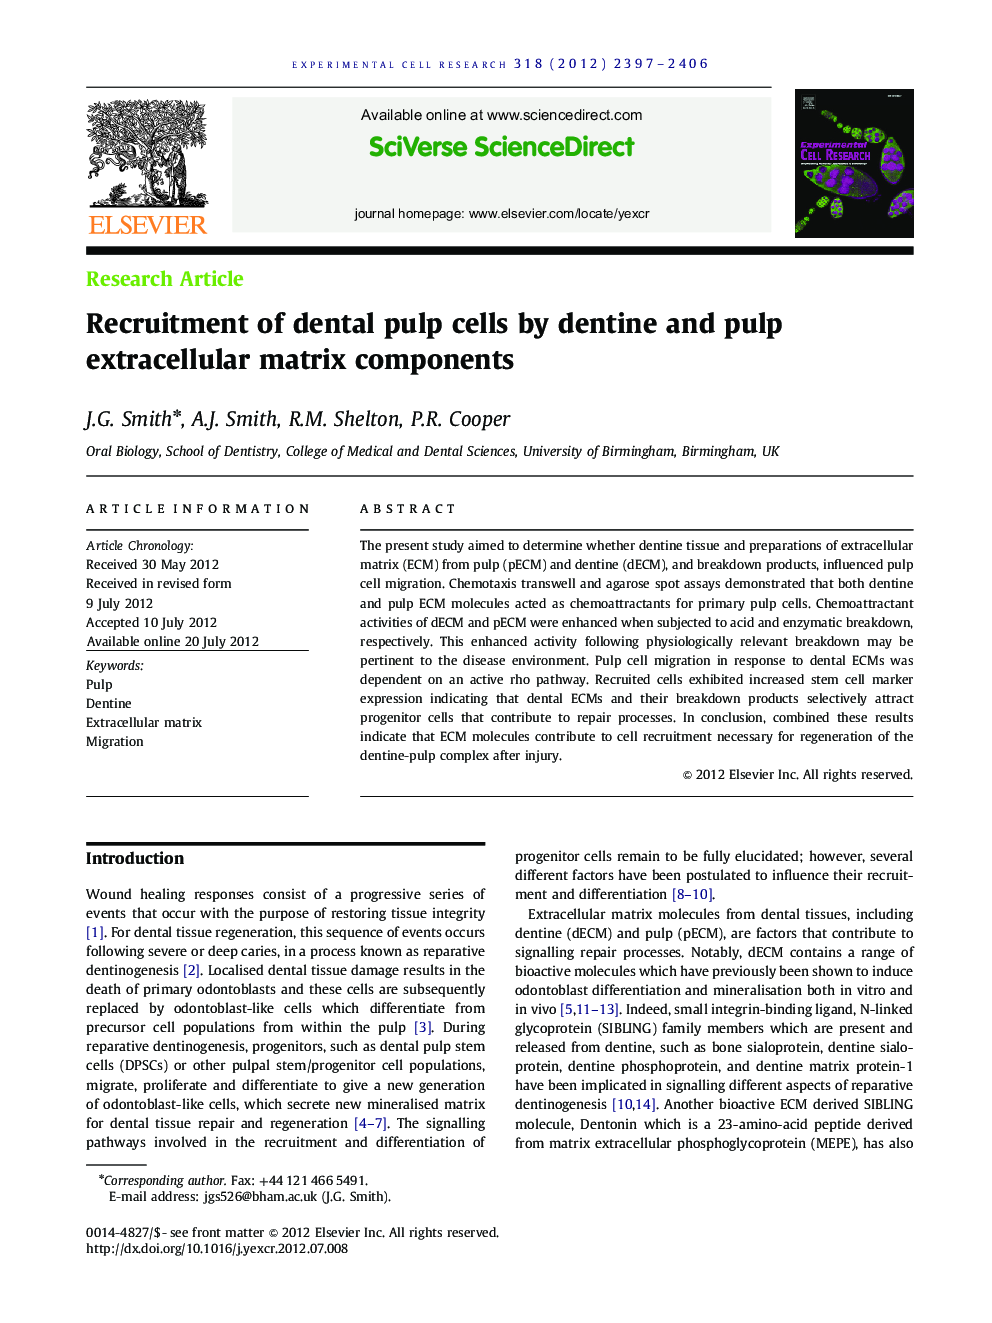 Recruitment of dental pulp cells by dentine and pulp extracellular matrix components